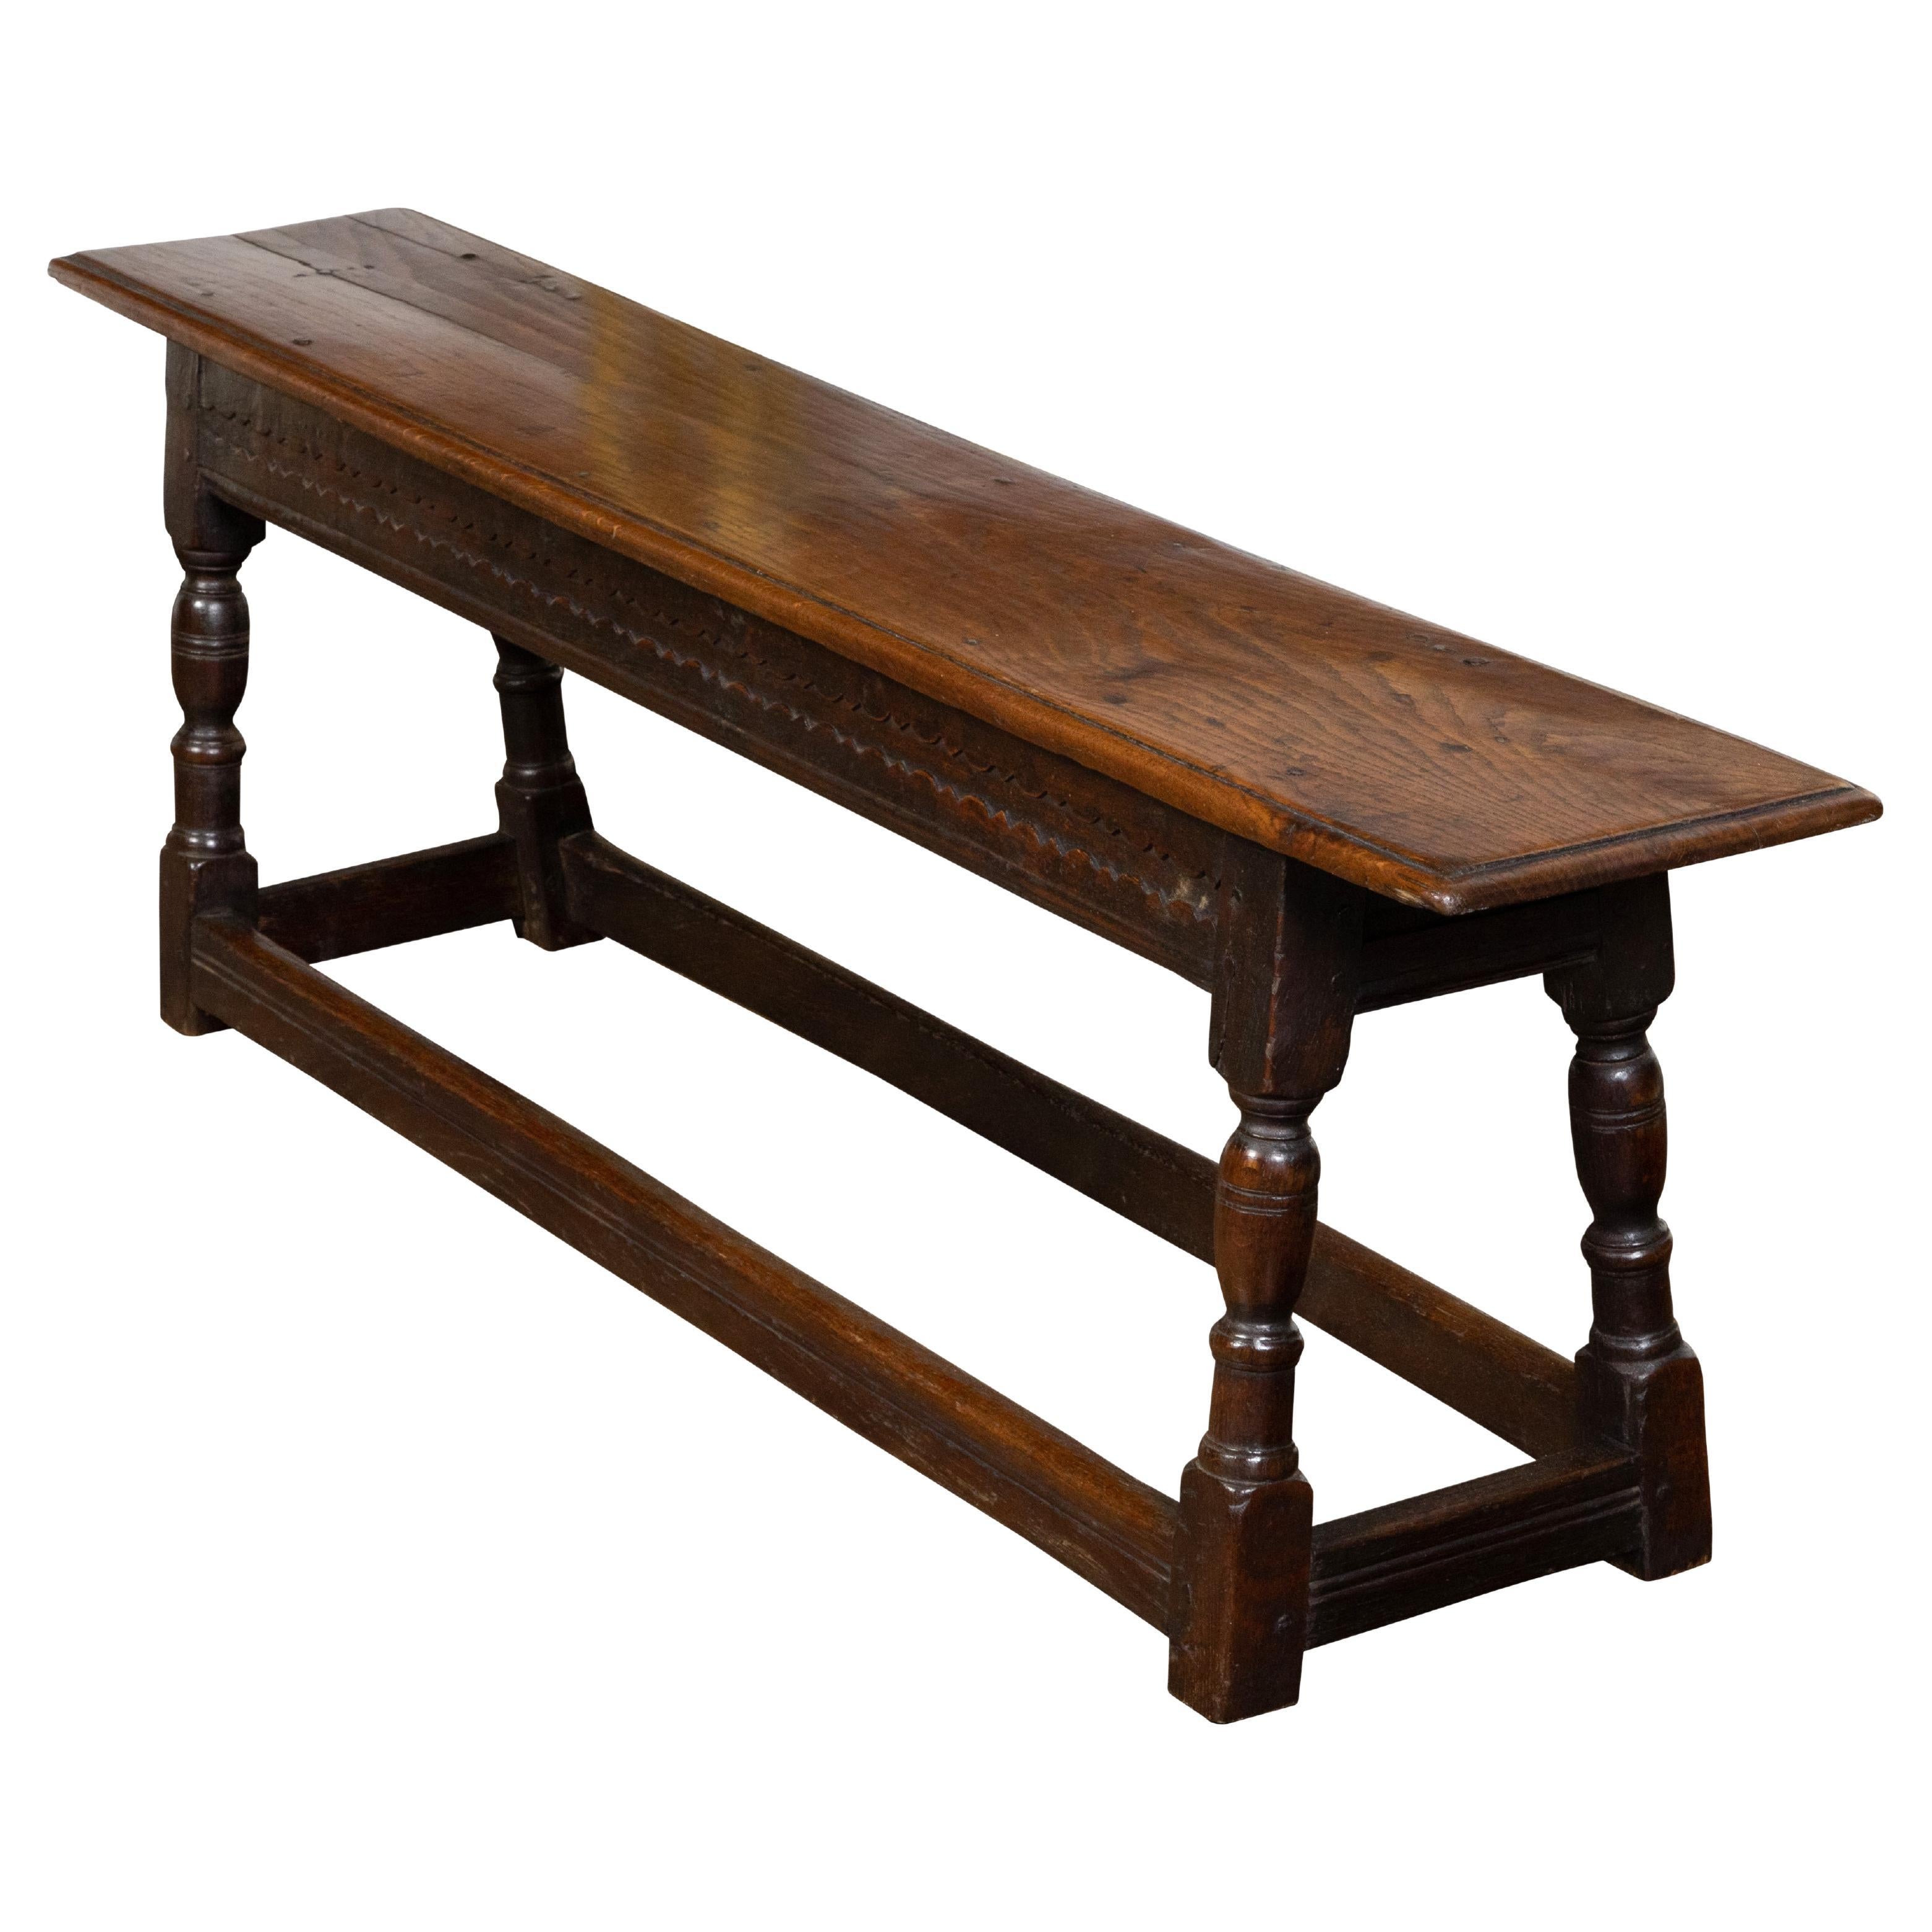 English Georgian 1820s Oak Bench with Turned Baluster Legs and Carved Apron